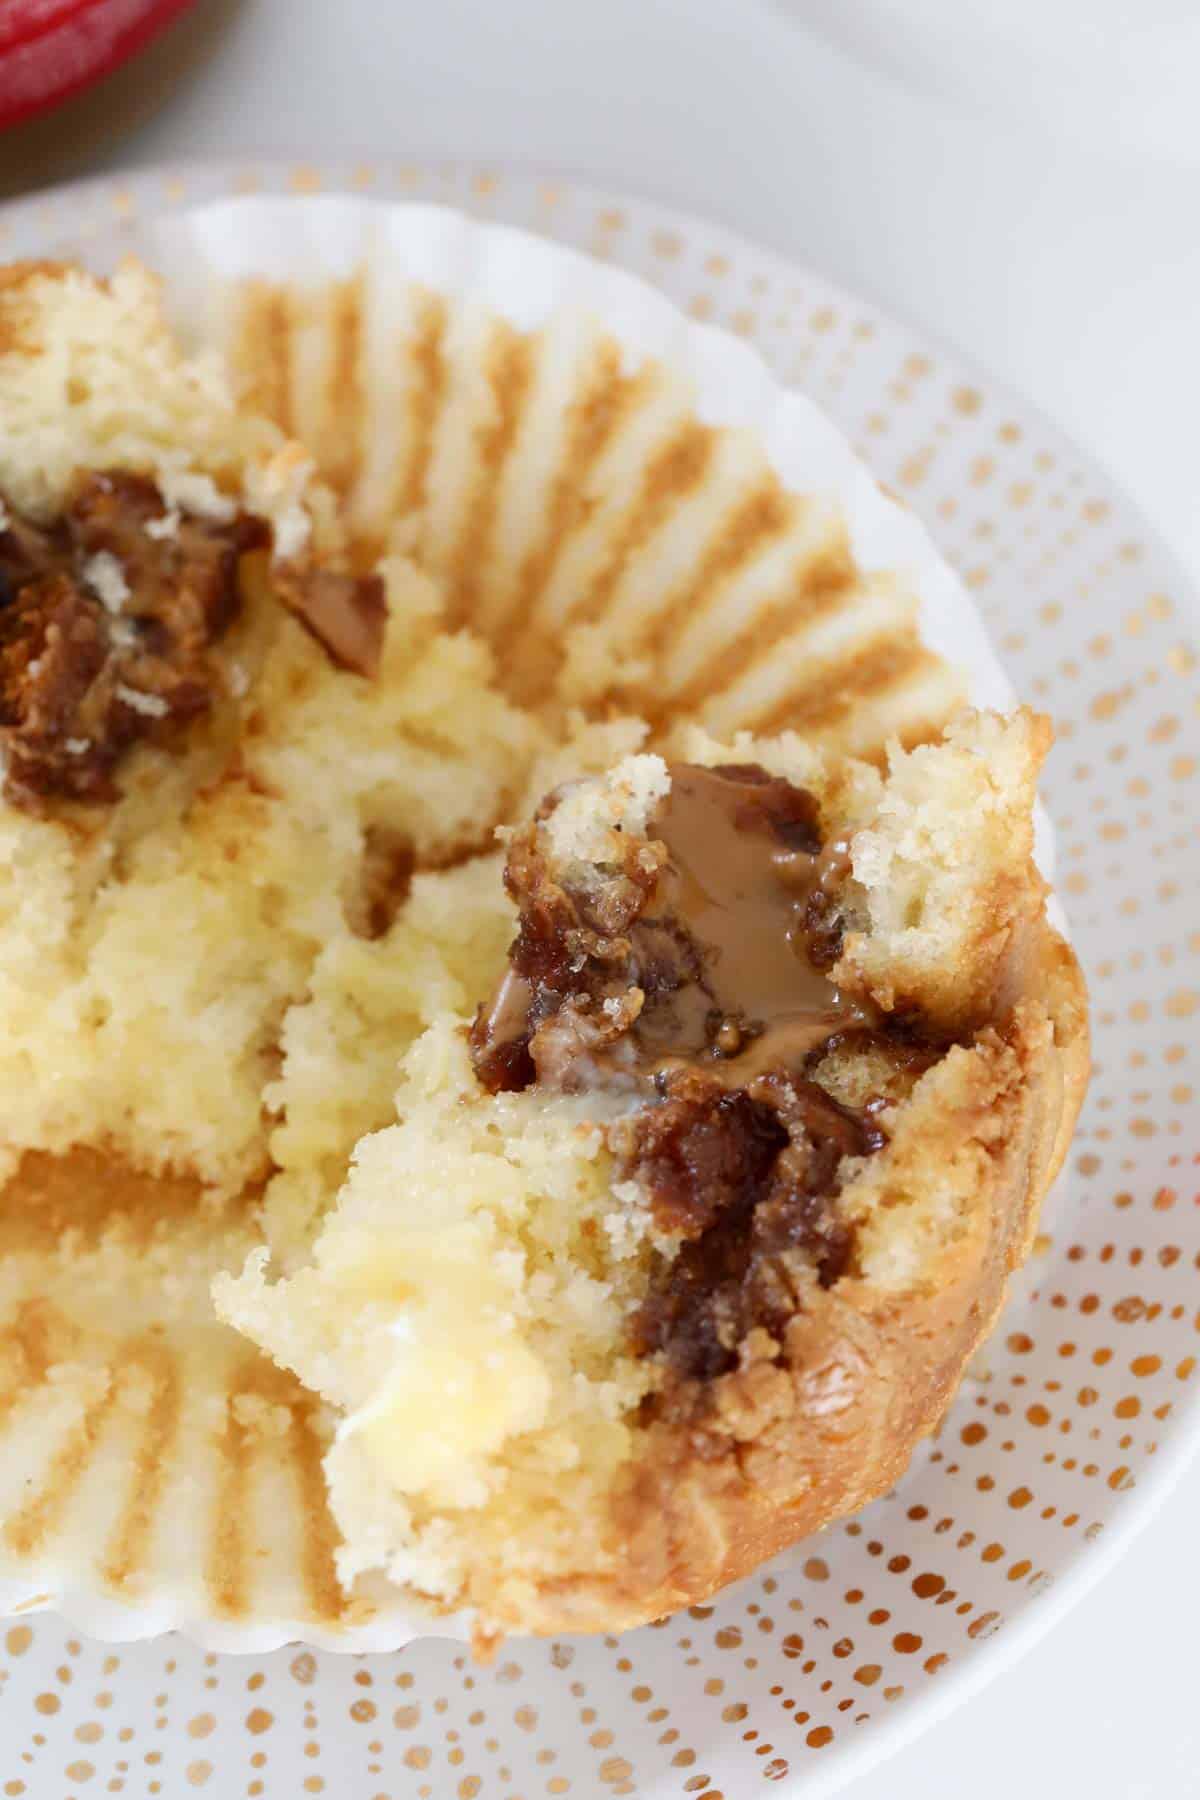 A muffin split open to show filling of soft Biscoff spread.